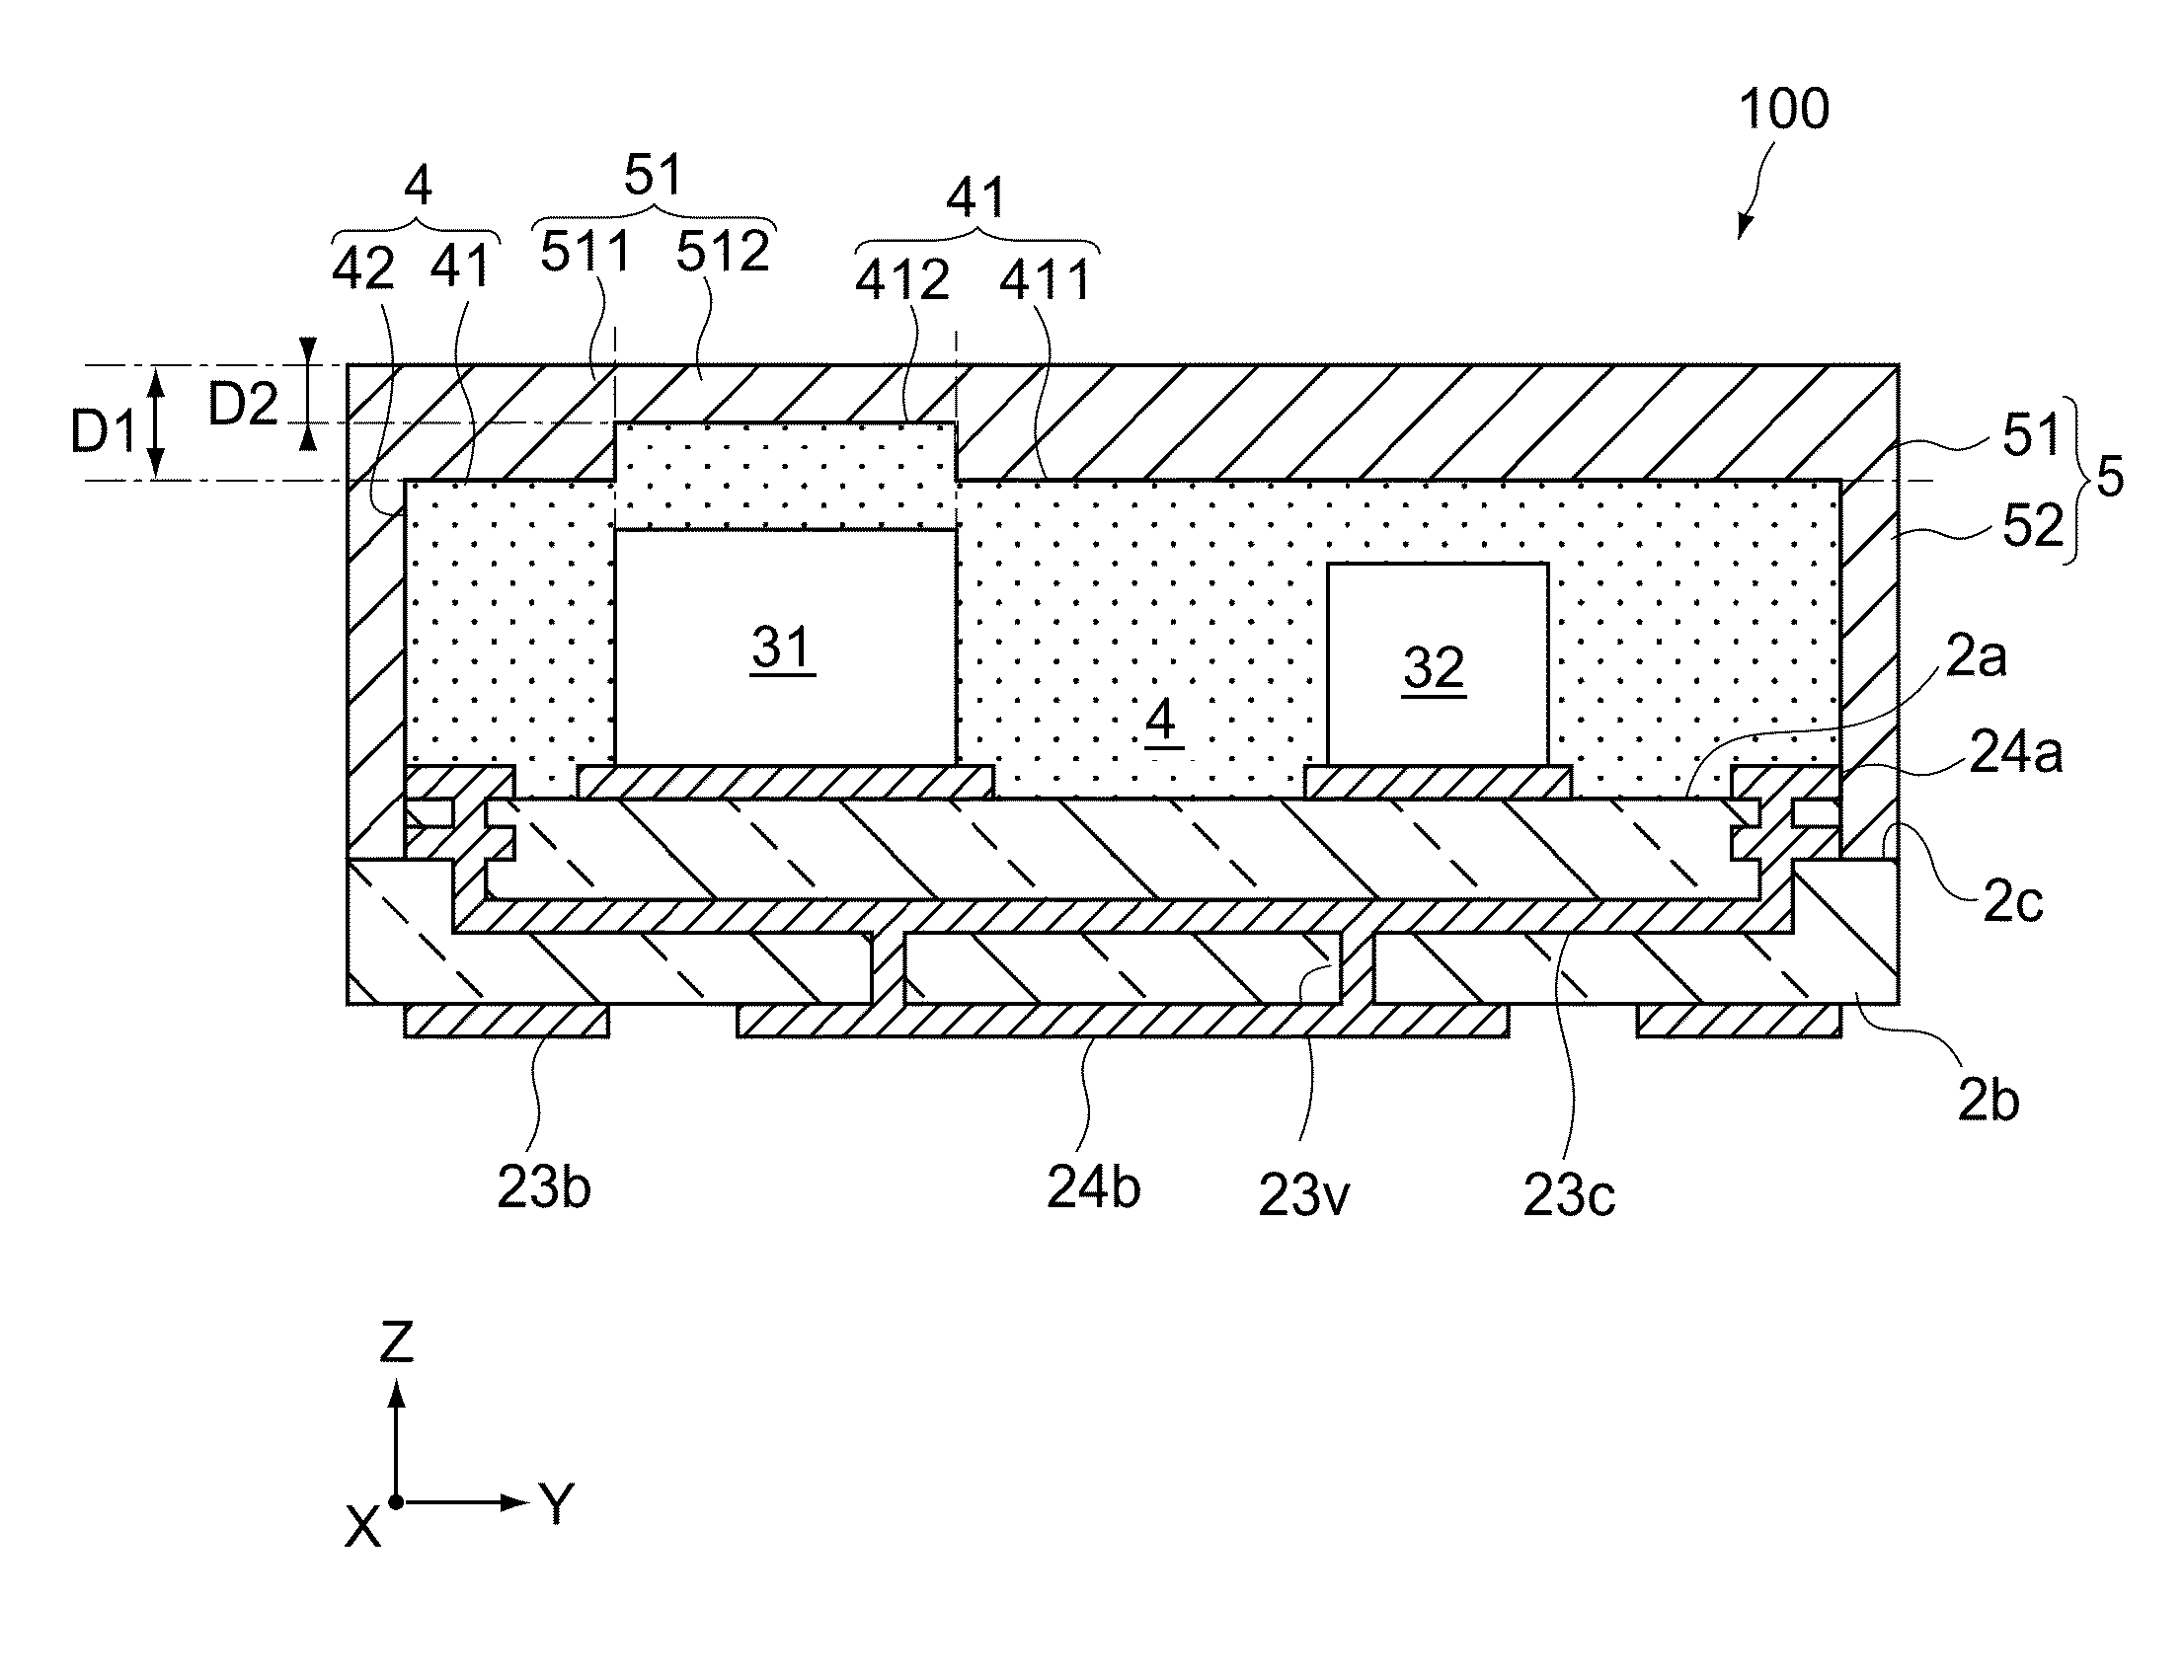 Circuit module and method of producing the same